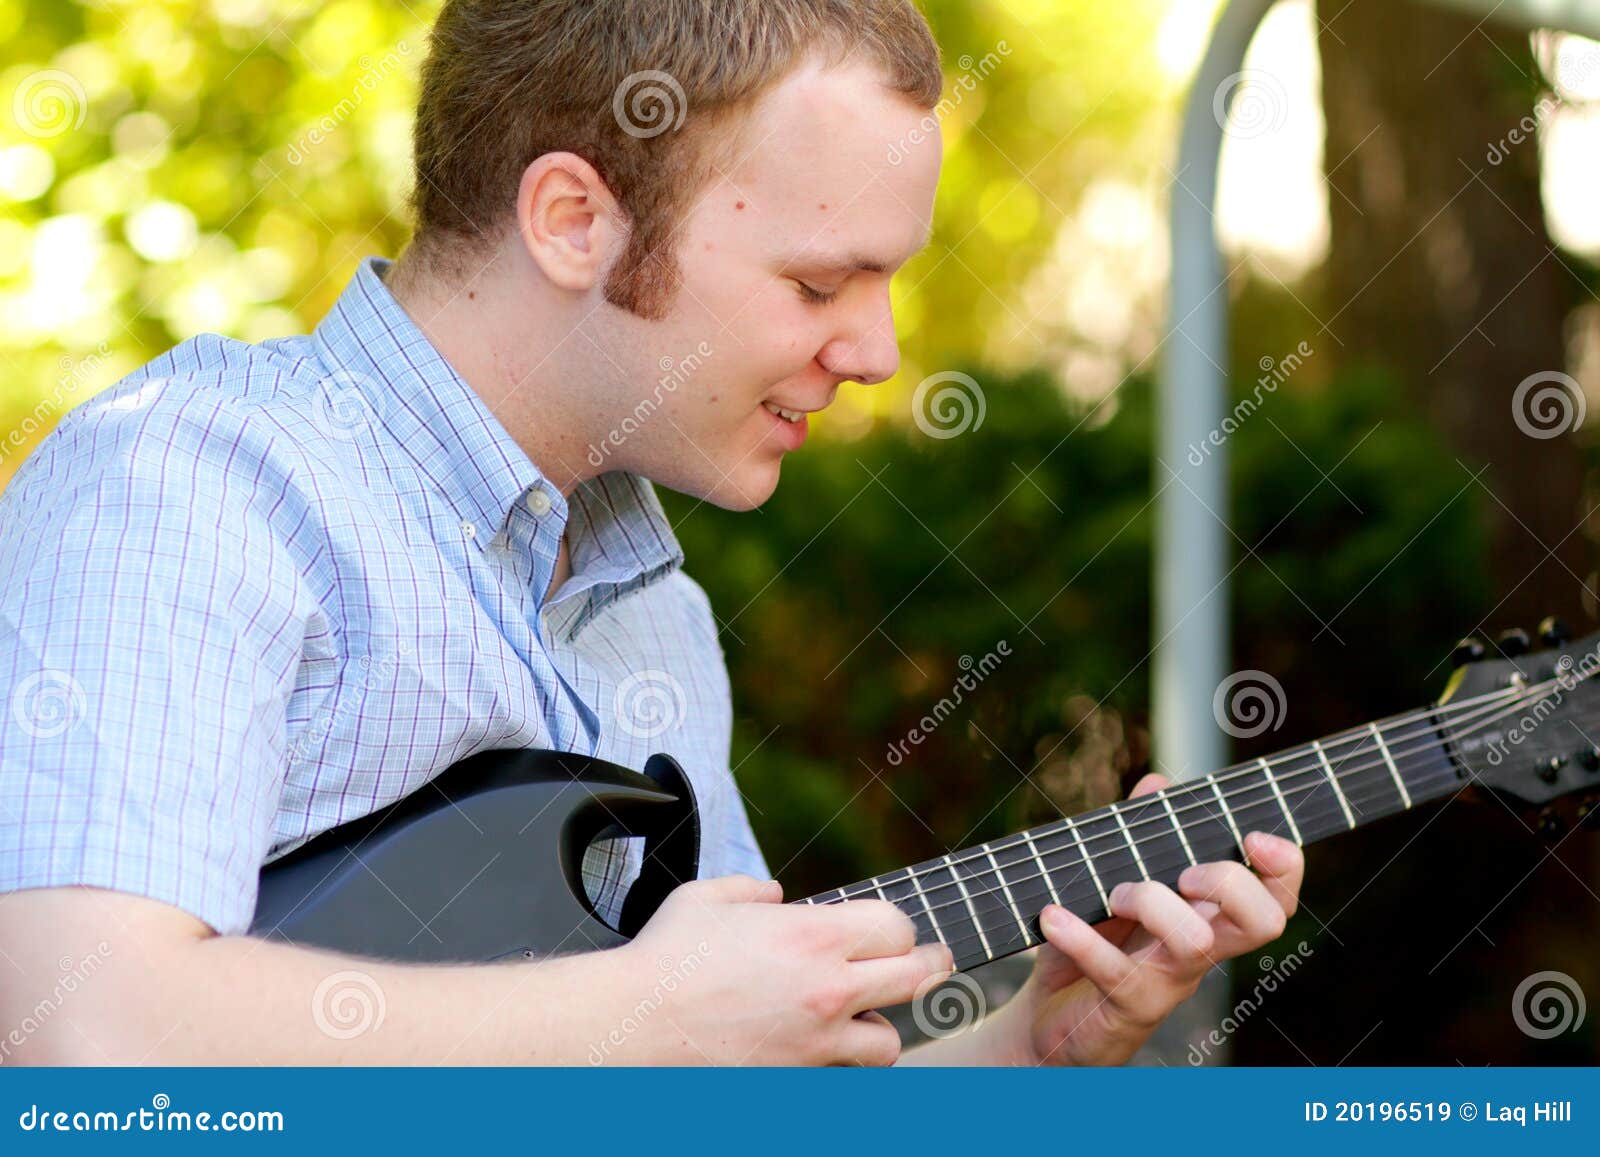 college boy concentrating on guitar